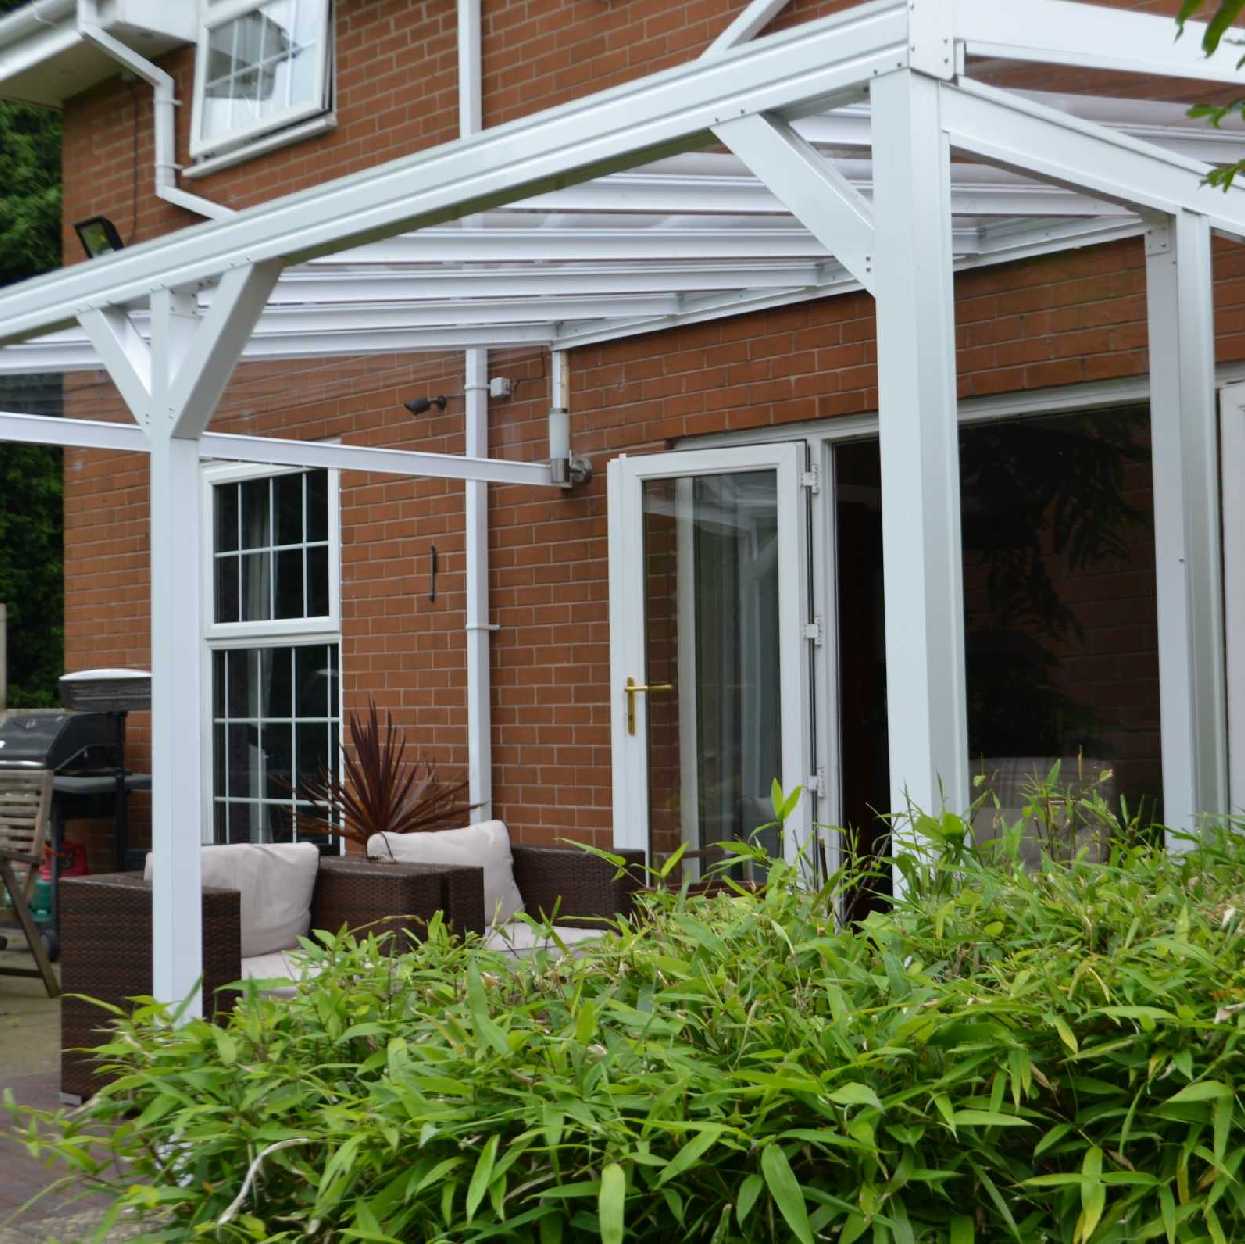 Omega Smart Lean-To Canopy, White with 6mm Glass Clear Plate Polycarbonate Glazing - 5.6m (W) x 2.5m (P), (3) Supporting Posts from Omega Build